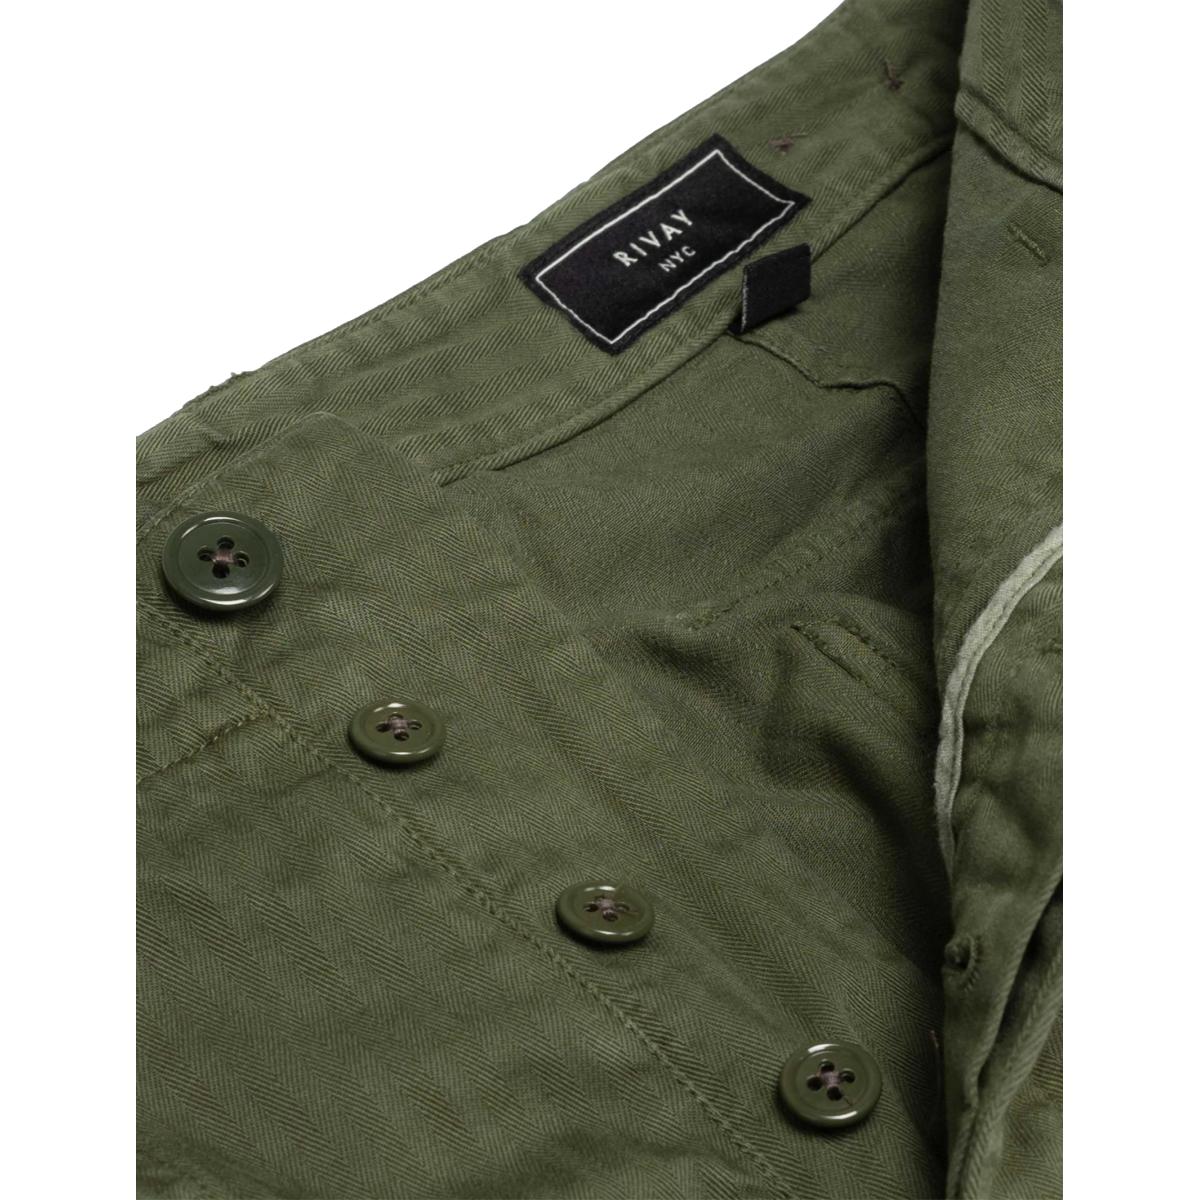 Garment Dyed Utility Pant in Olive Drab - Fatigue Pant